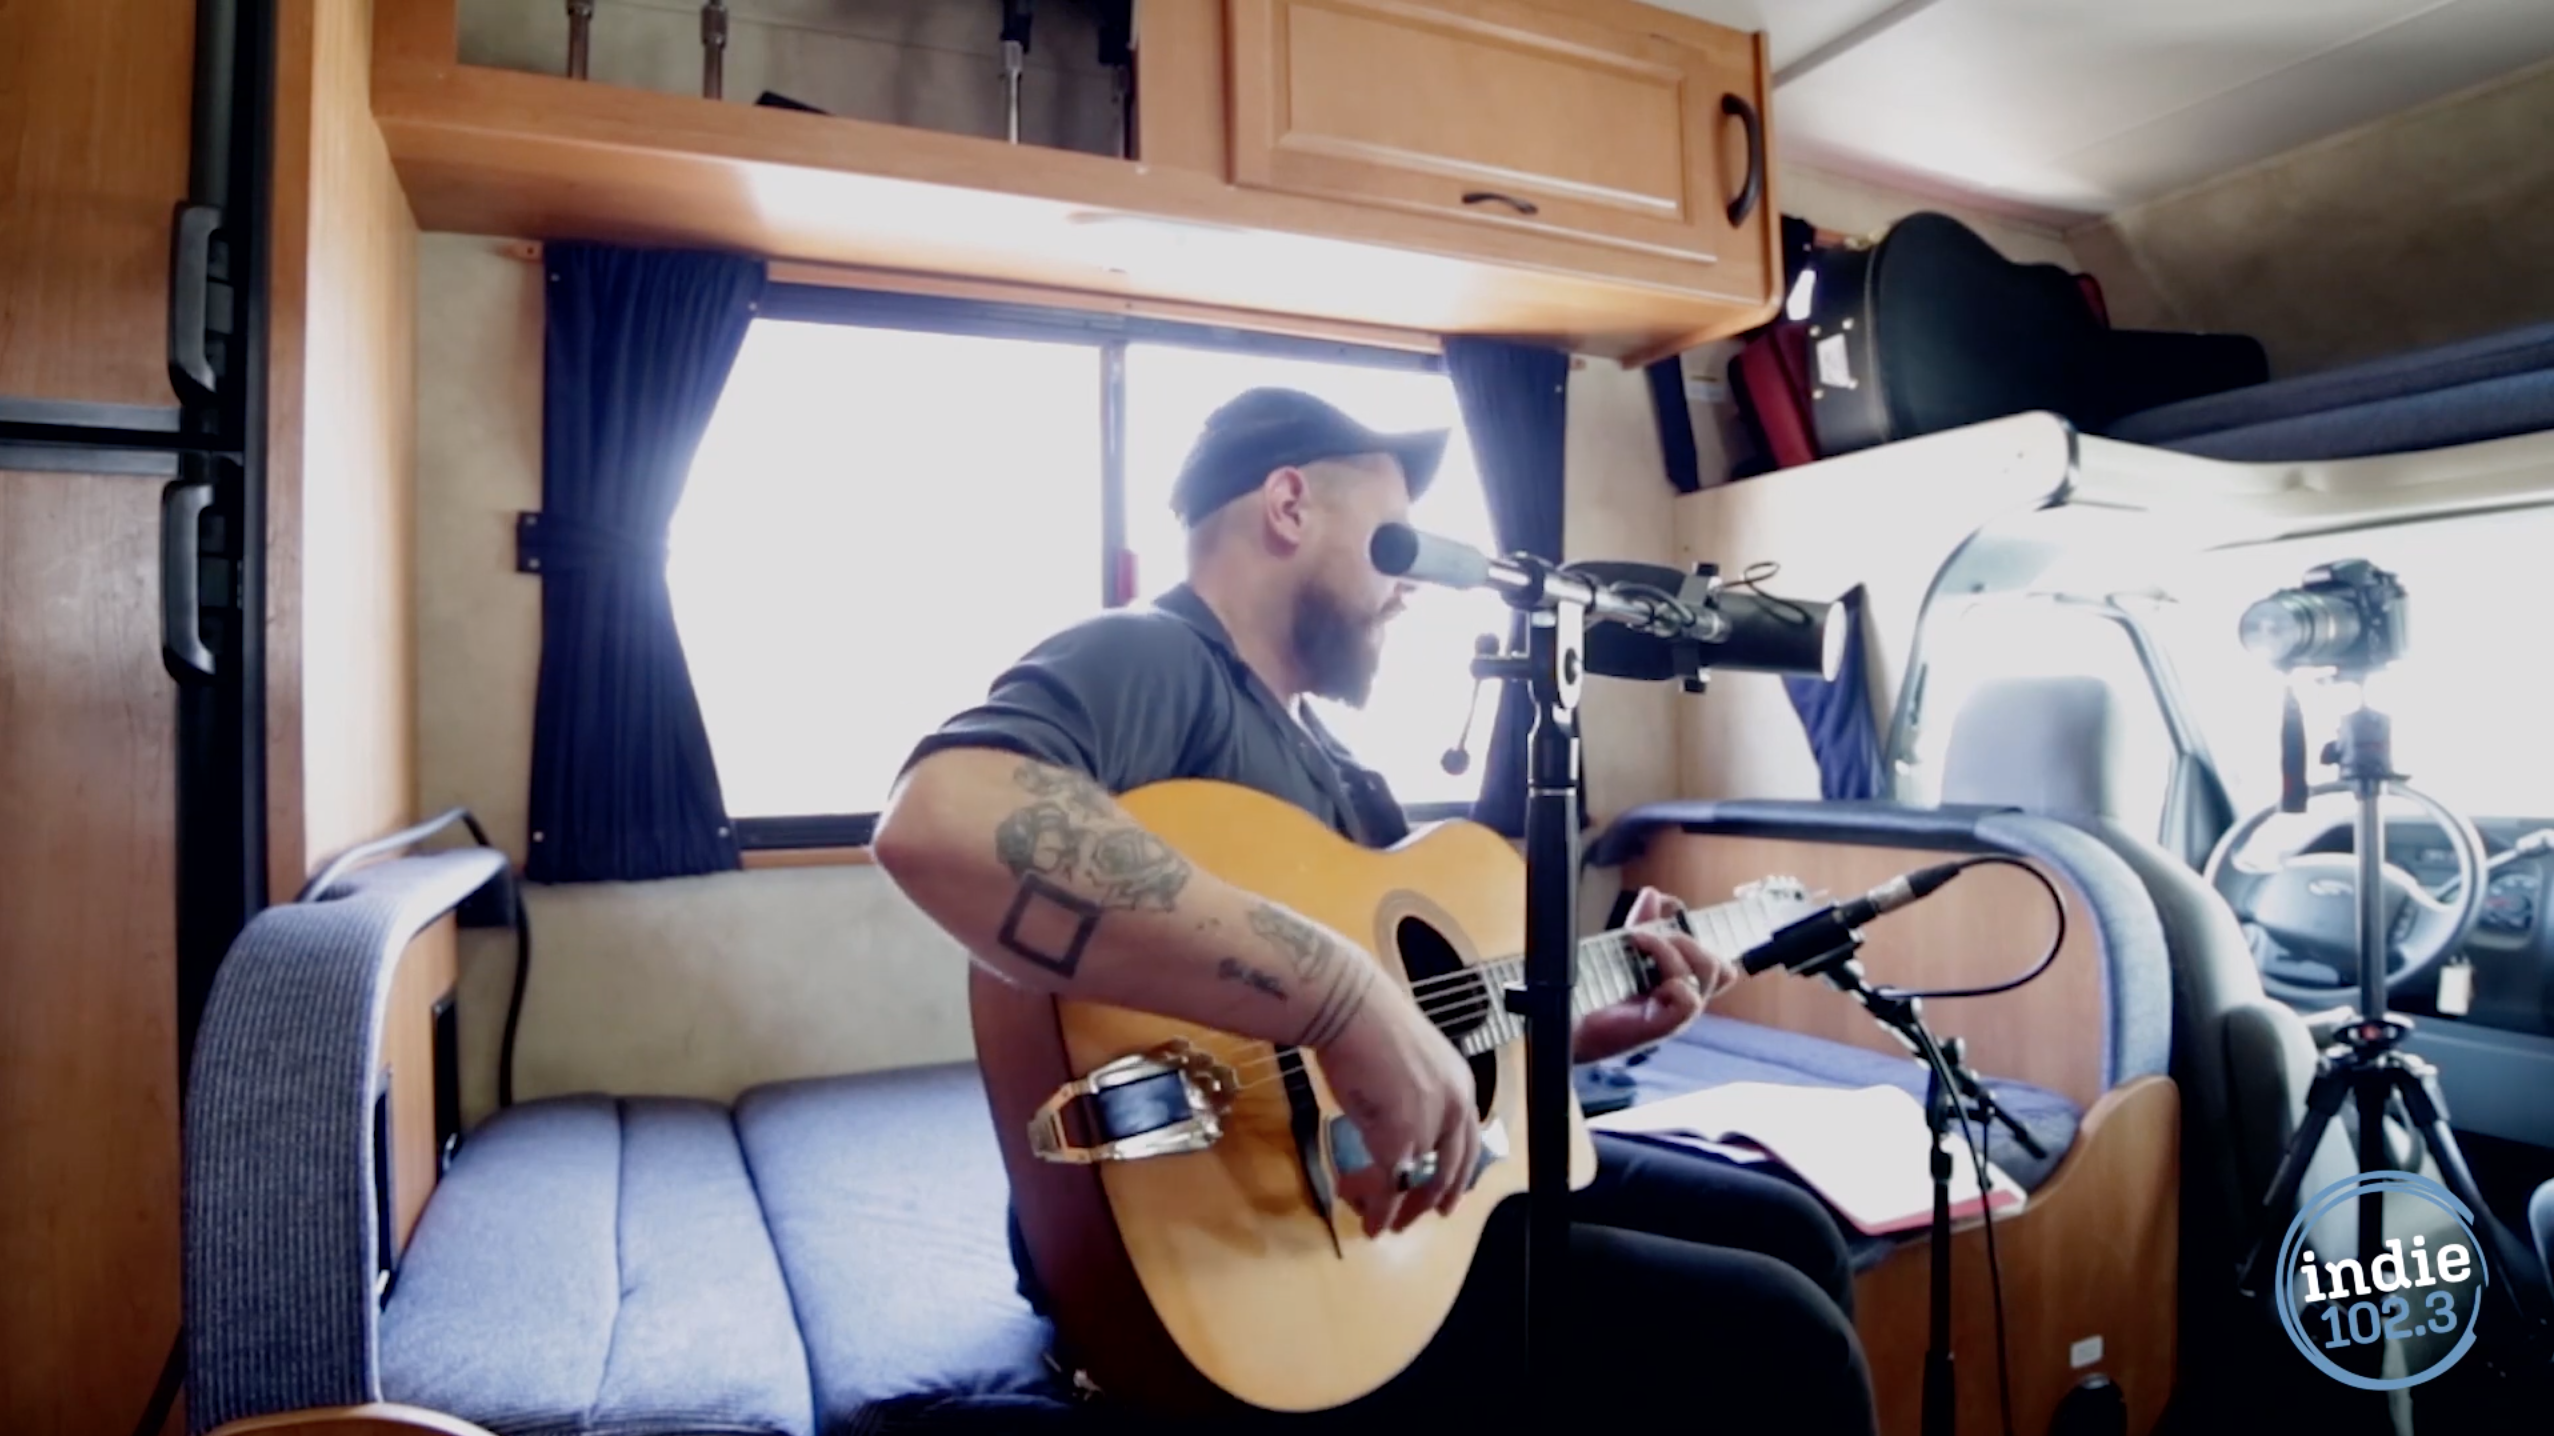 In the video above, Nathaniel Rateliff stopped by our RV during the Underground Music Showcase in 2014 and recorded a session.